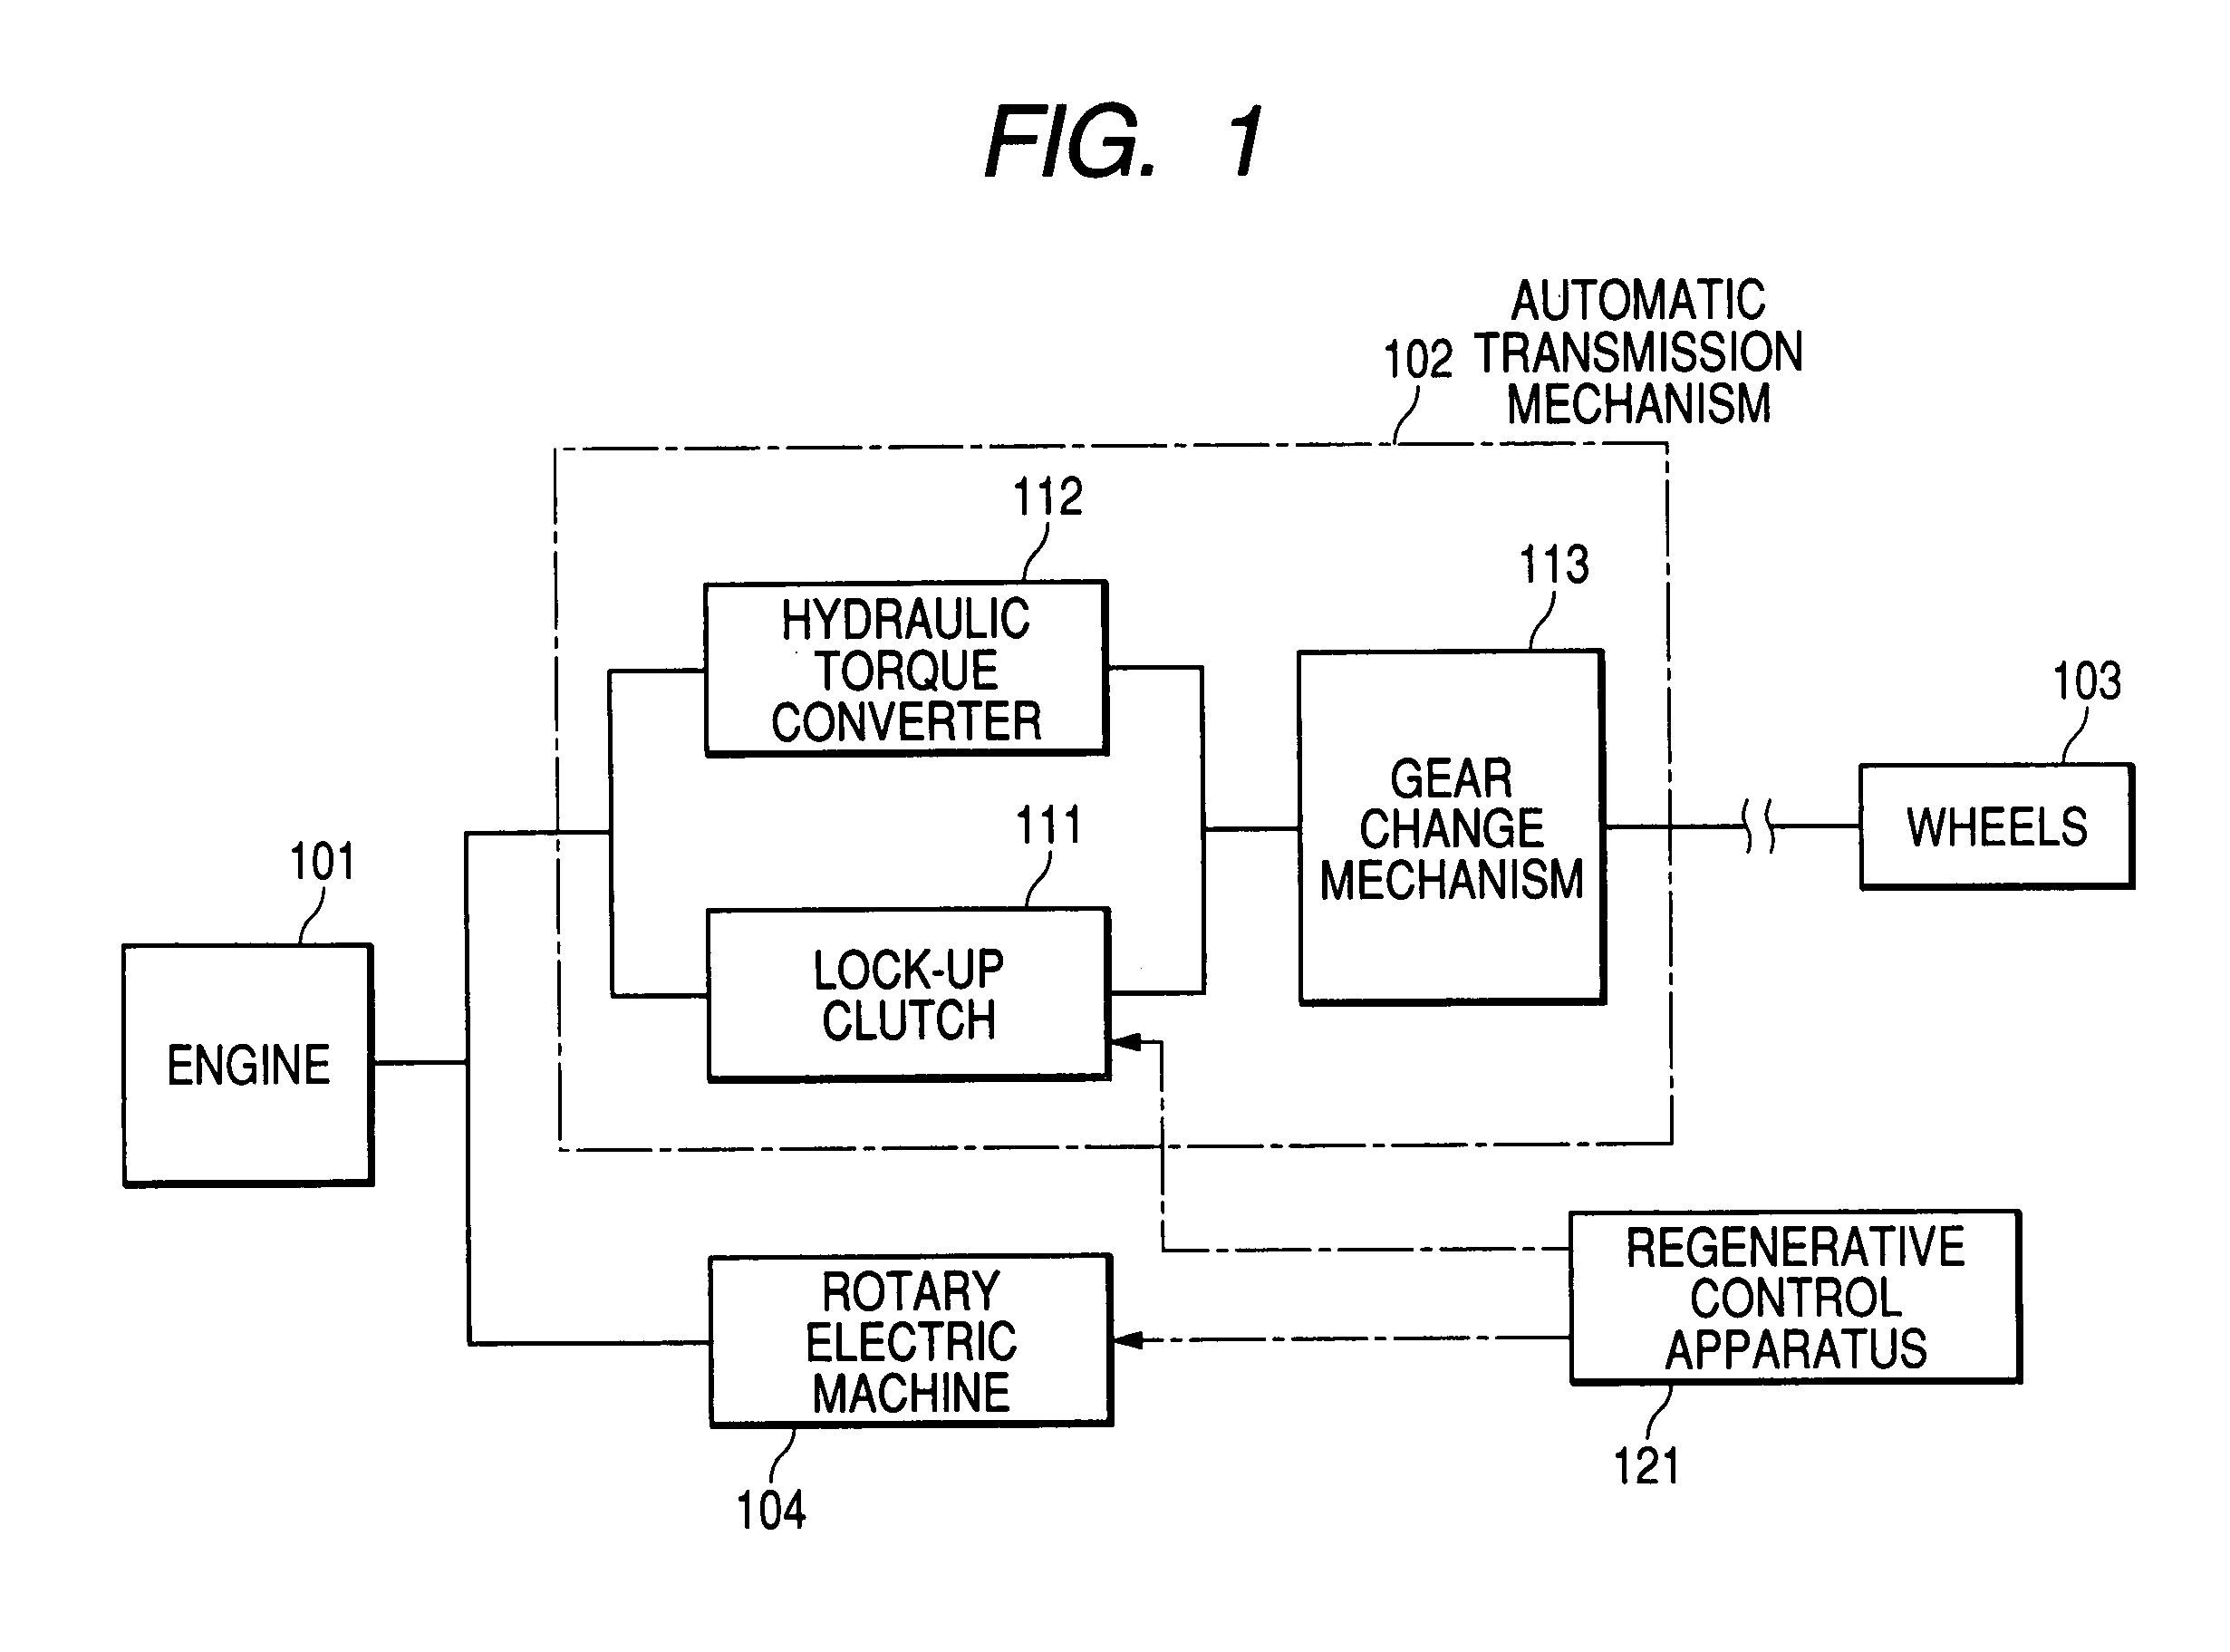 Regenerative control apparatus for vehicles equipped with a lock-up clutch